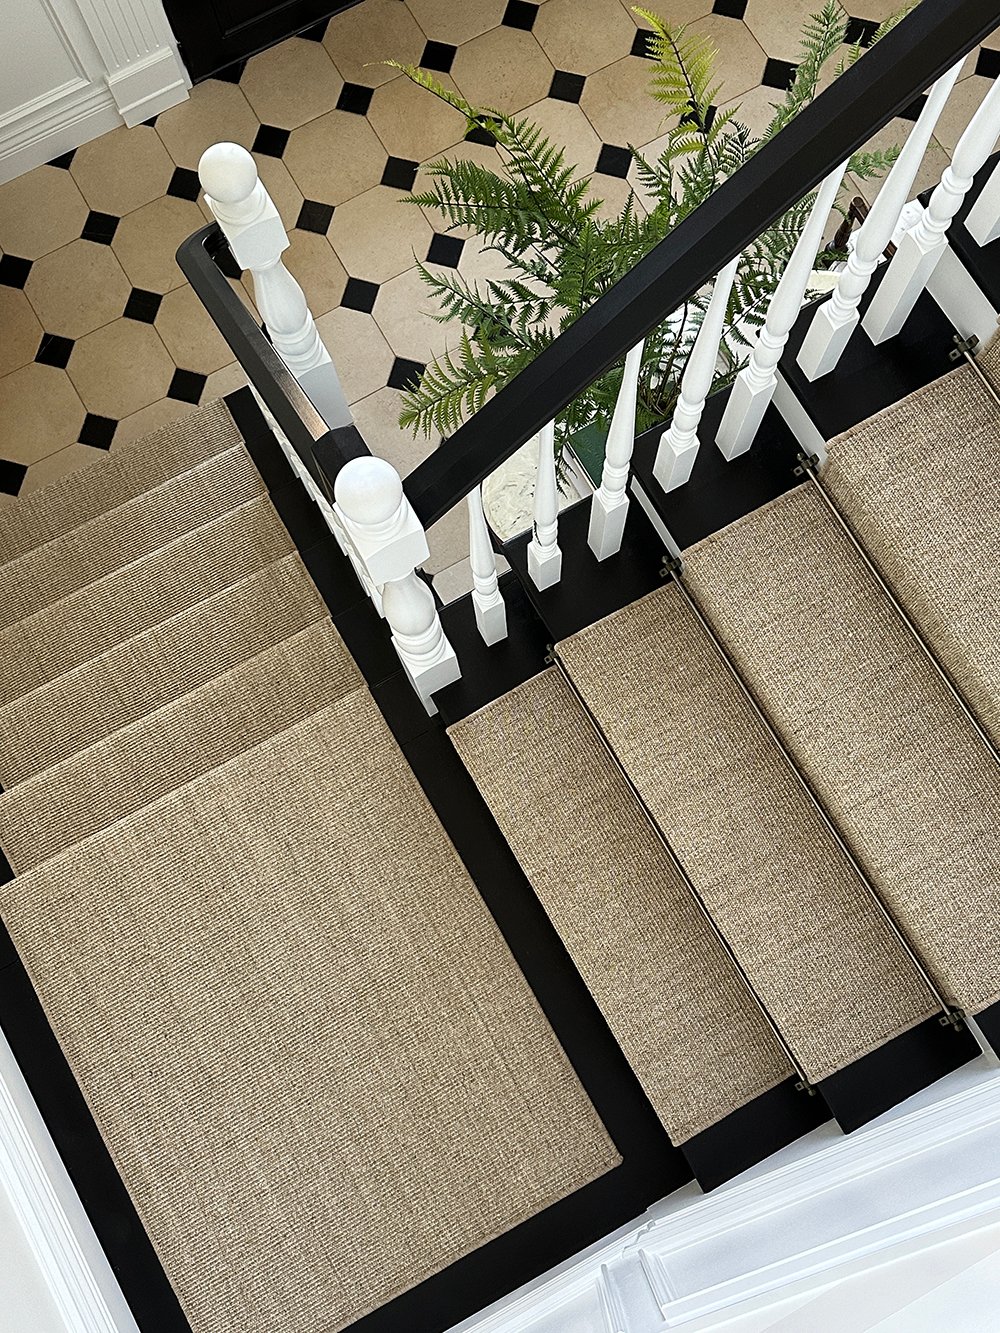 How to Install a Stair Runner with an Easy Staircase Landing - roomfortuesday.com